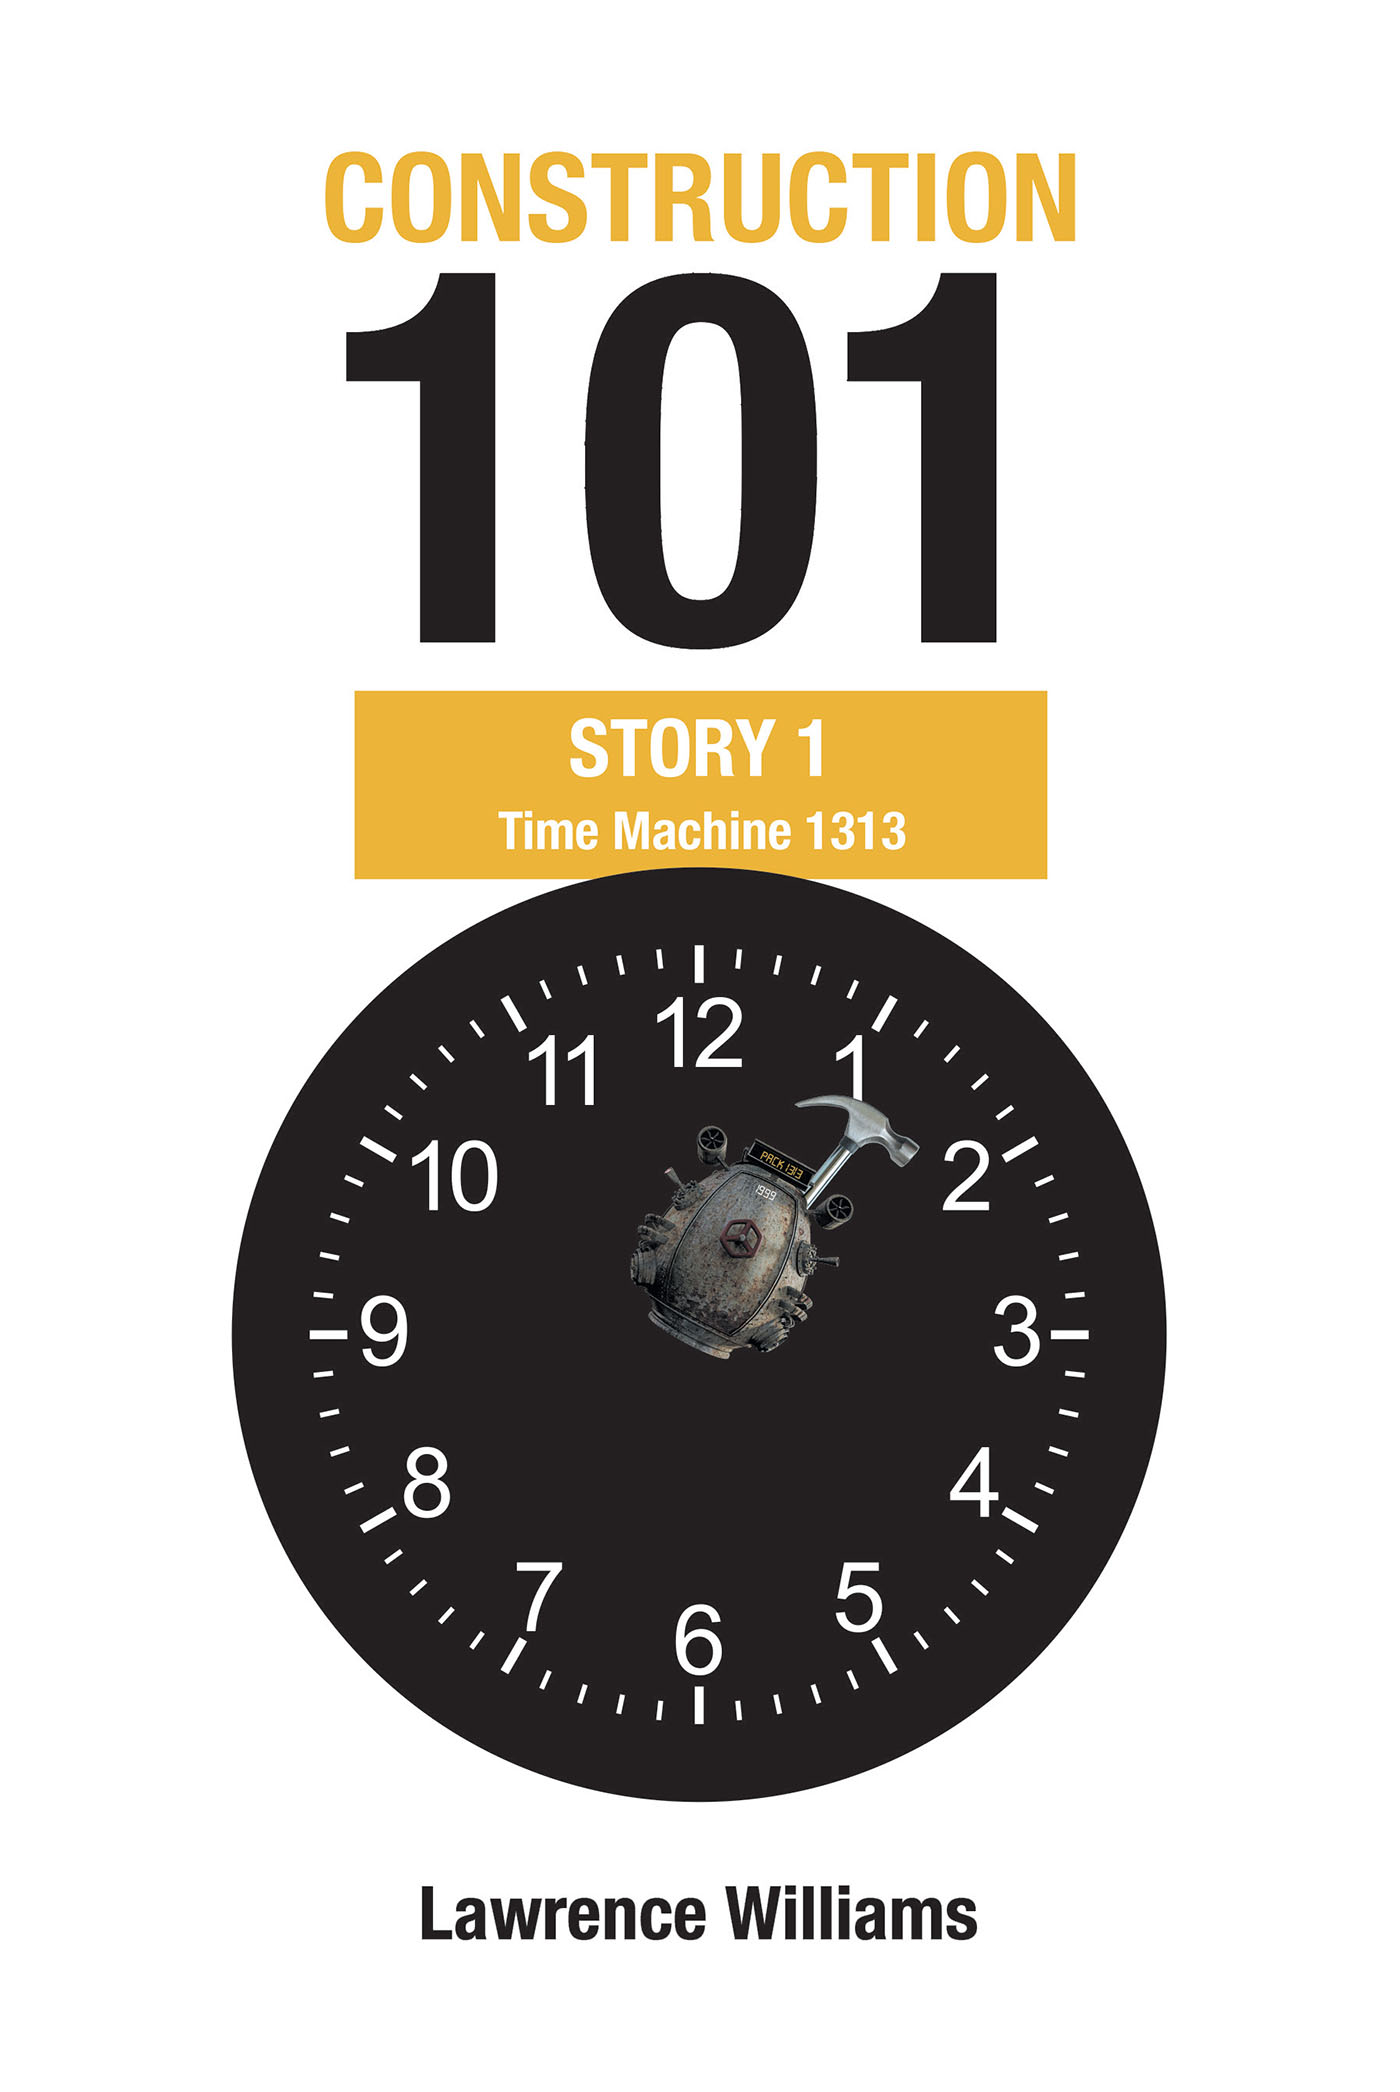 Author Lawrence Williams’s New Book, "Construction 101 Story 1: Time Machine 1313," is Written to Encourage Young Readers and Teach Them Life’s Important Lessons